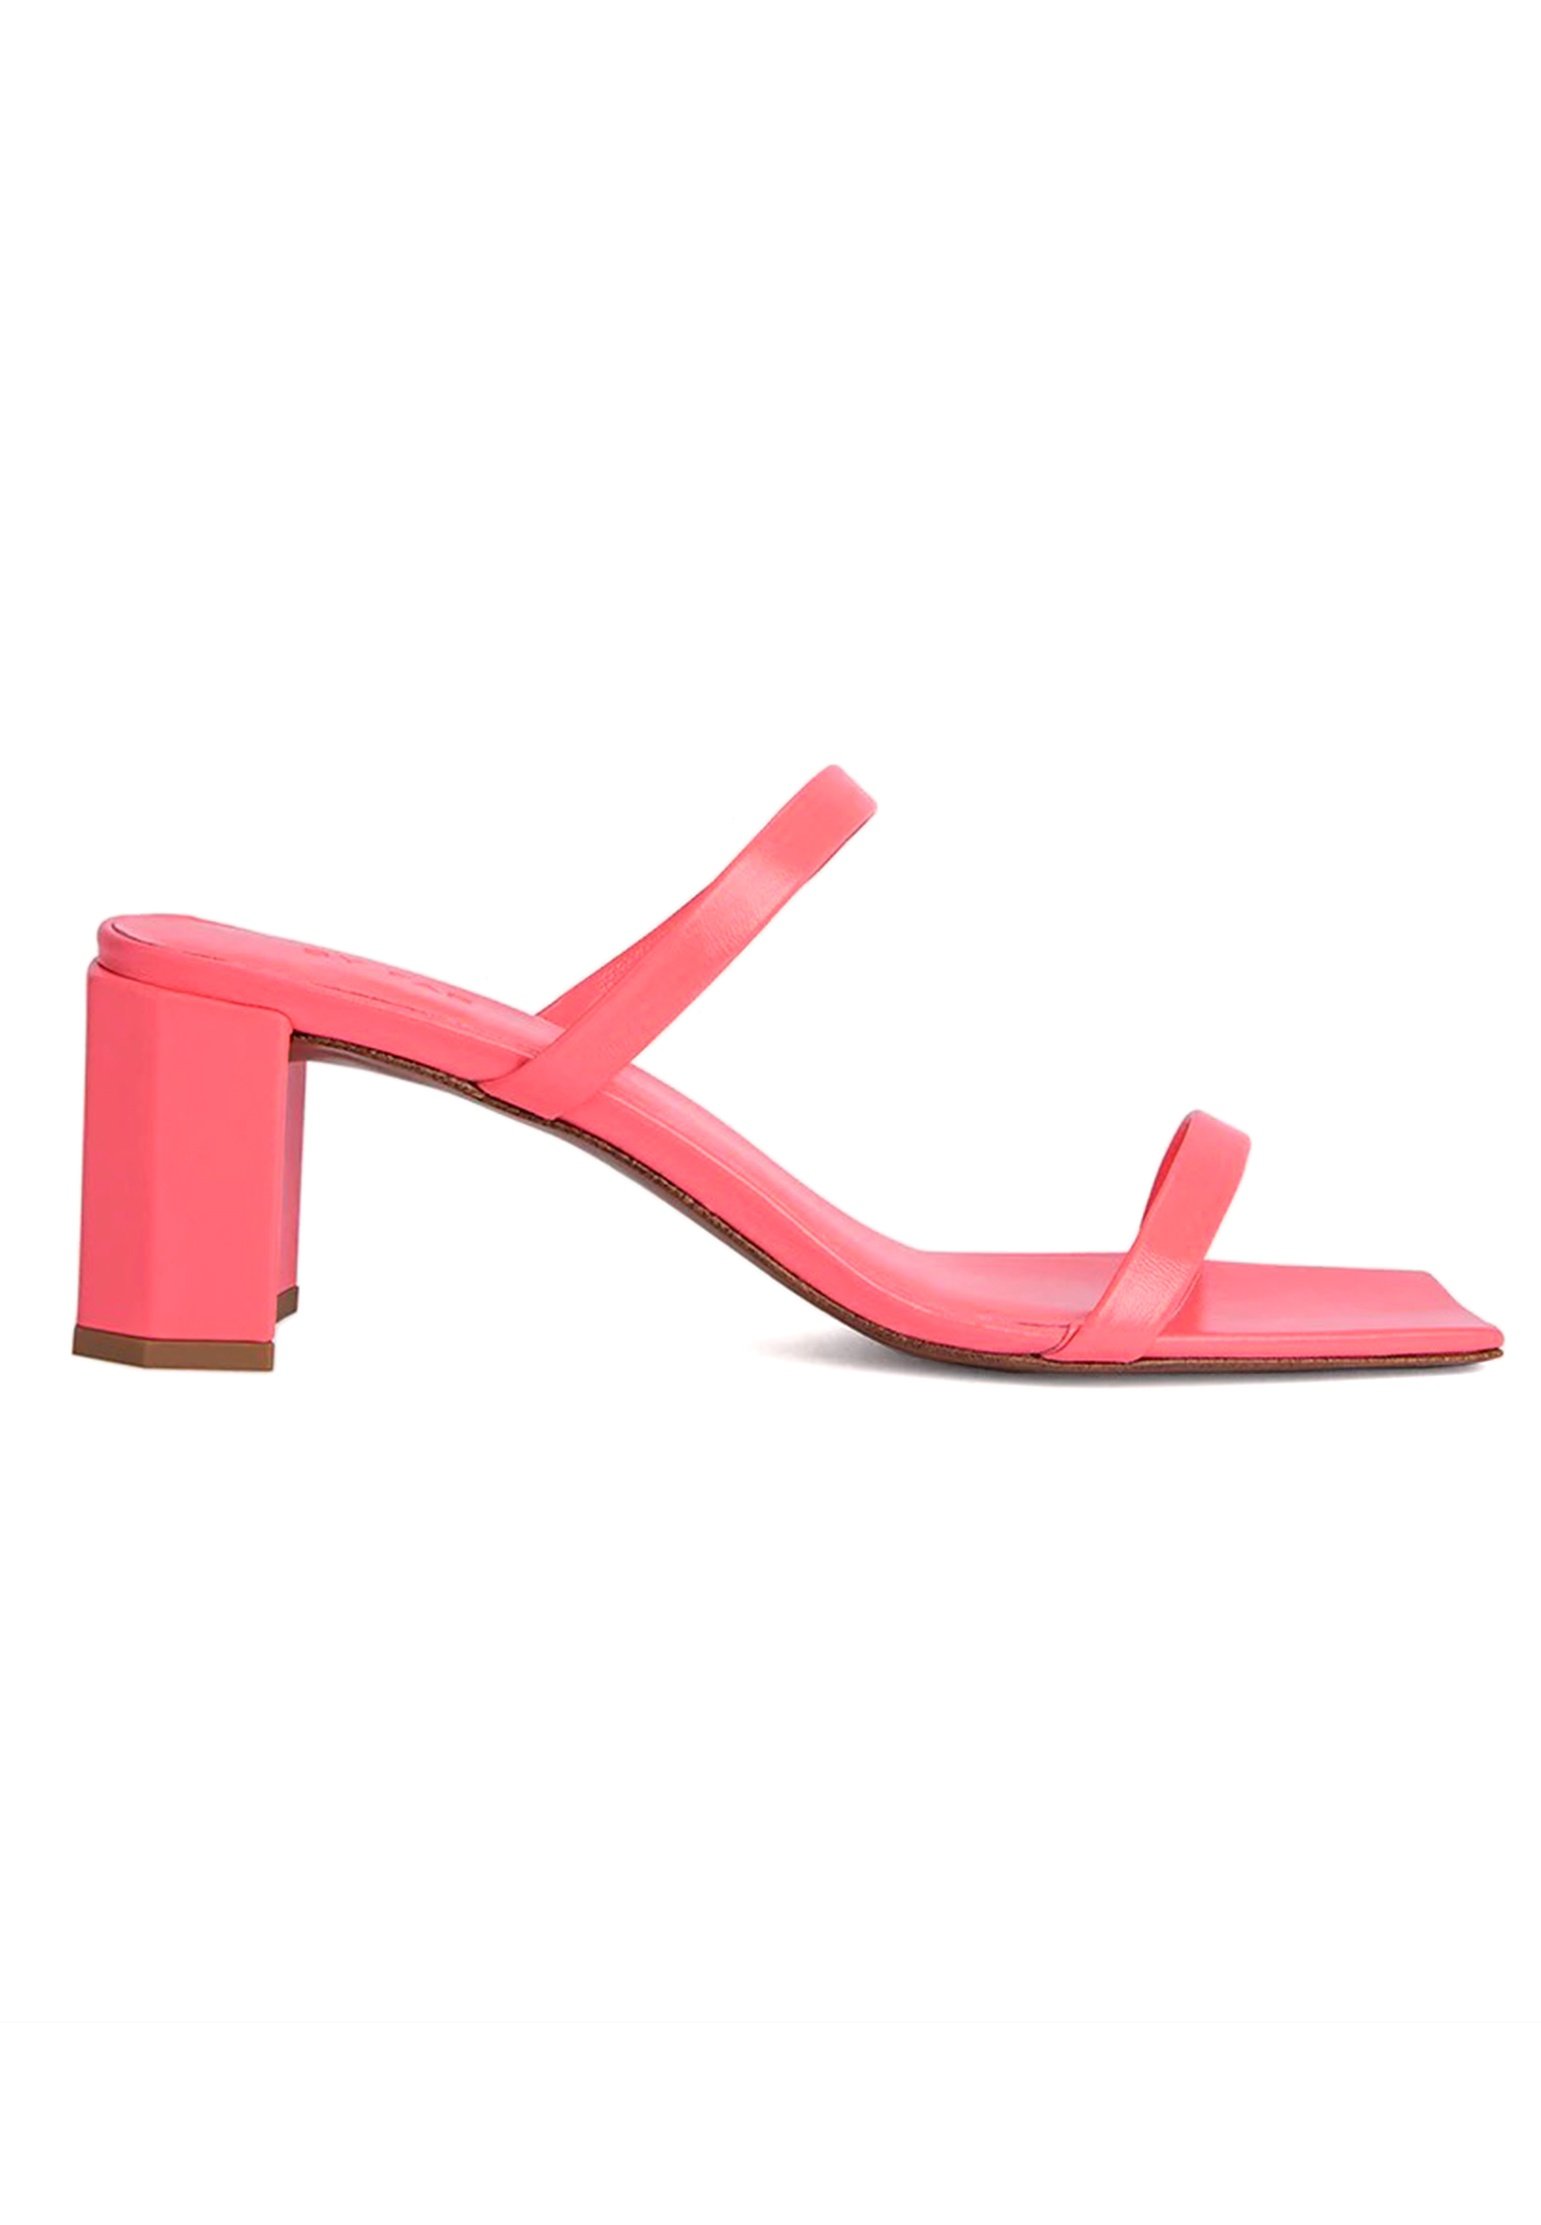 Mules BY FAR Color: venus (Code: 586) in online store Allure